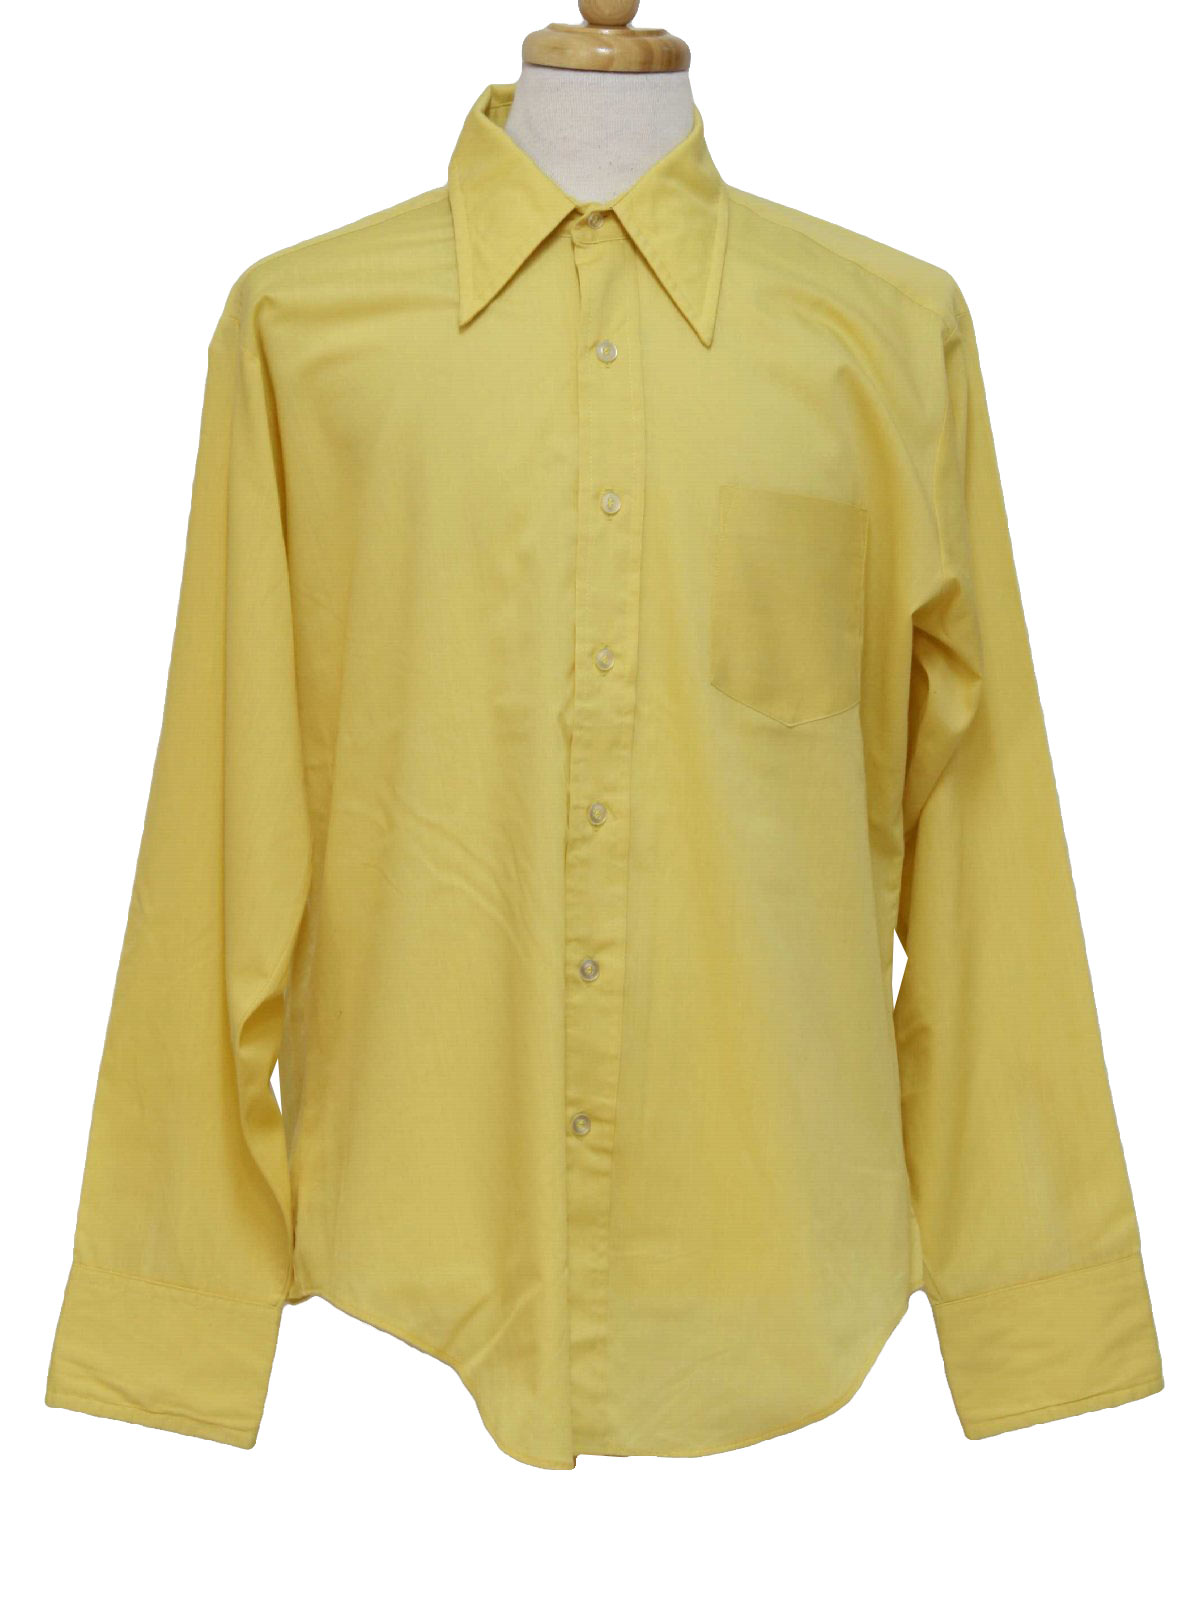 Vintage Bonds 1960s Shirt: Late 60s or Early 70s -Bonds- Mens yellow ...